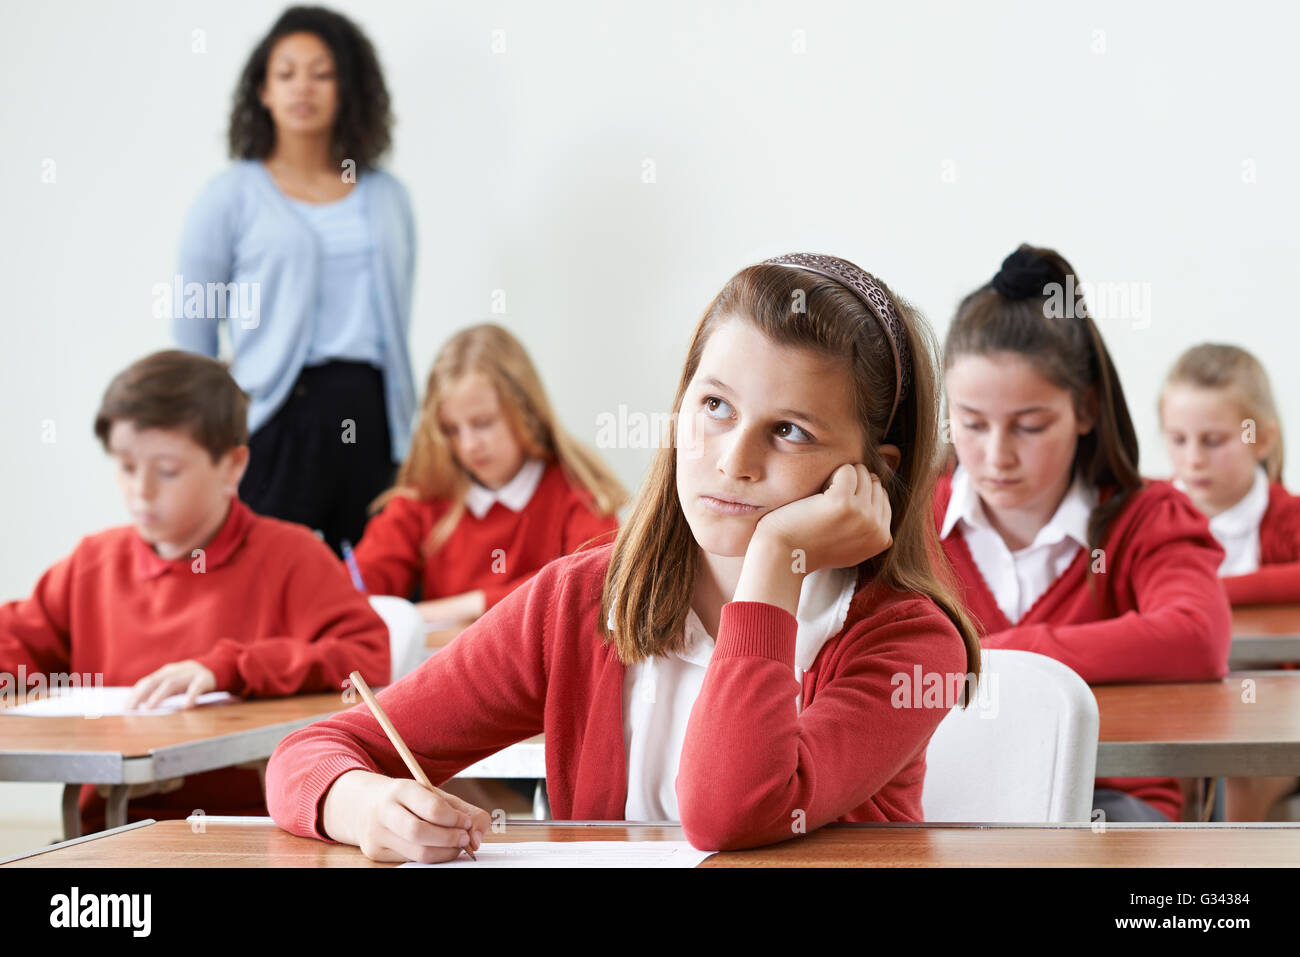 Female Pupil Finding School Exam Difficult Stock Photo